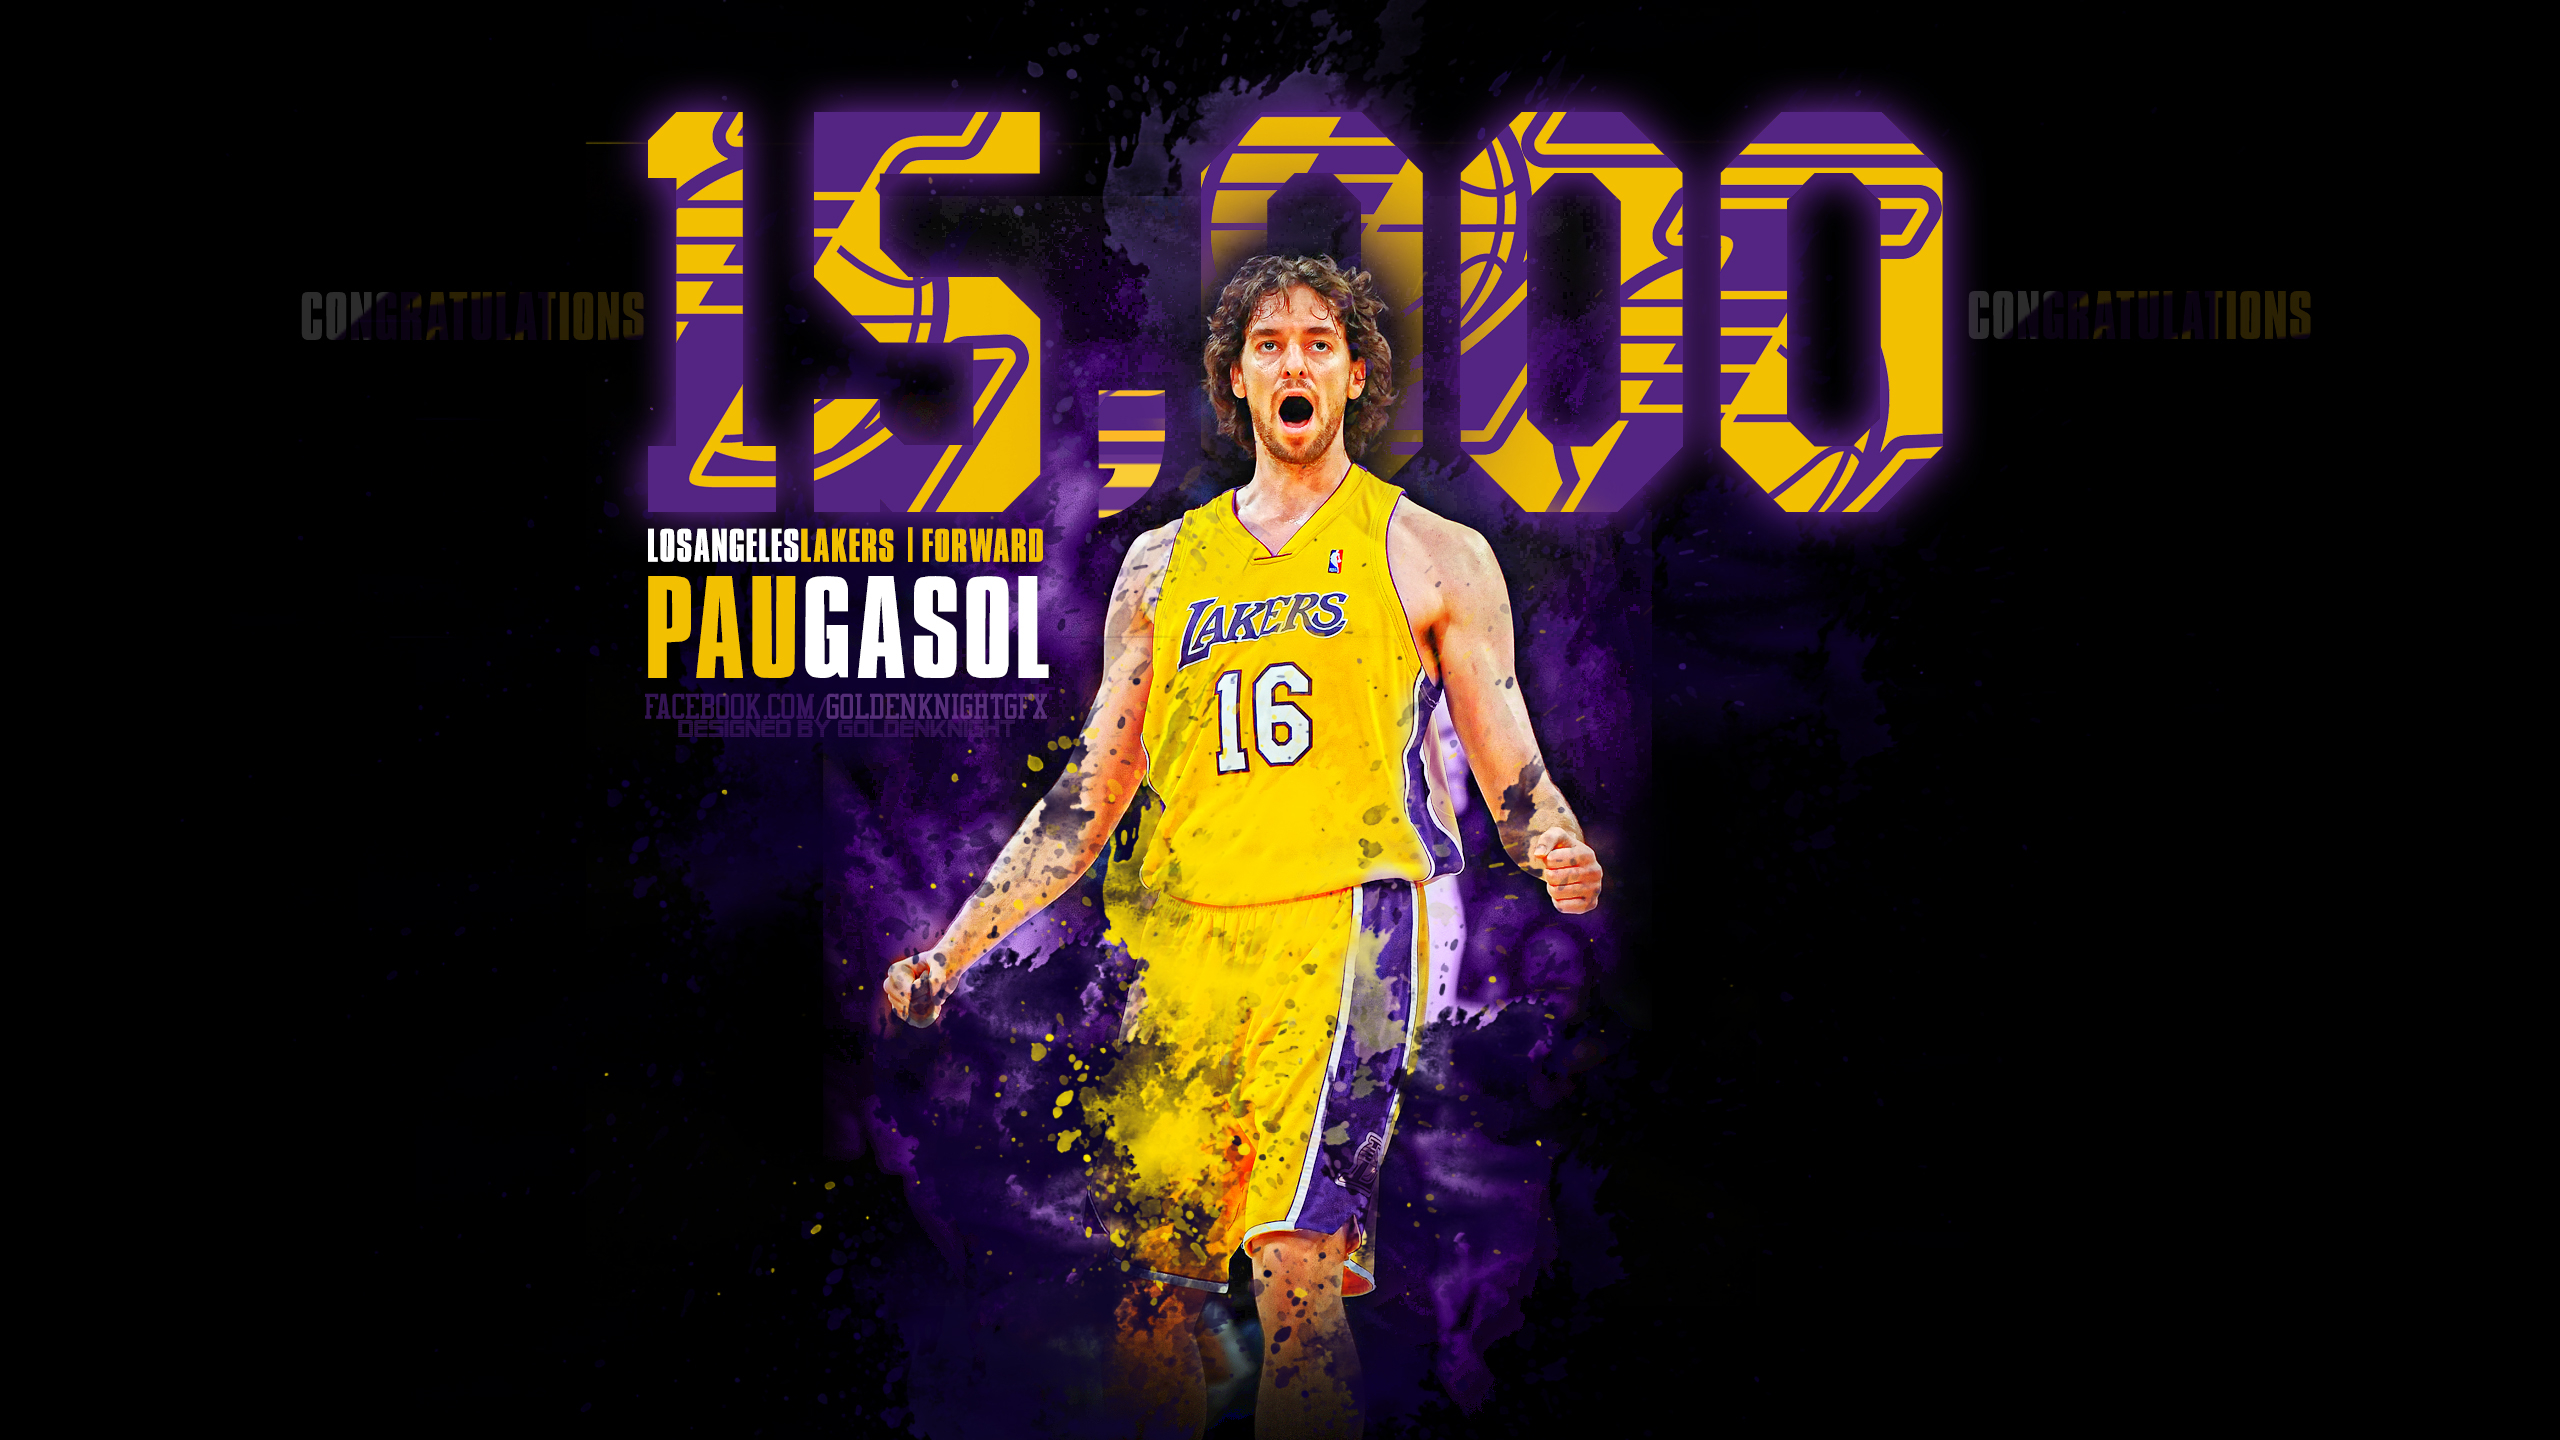 2560x1440 Free download Pau Gasol Wallpaper The Art Mad Wallpapers [] for your Desktop, Mobile \u0026 Tablet | Explore 77+ Pau Gasol Wallpaper | Pau Gasol Wallpaper, Pau Gasol Wallpapers